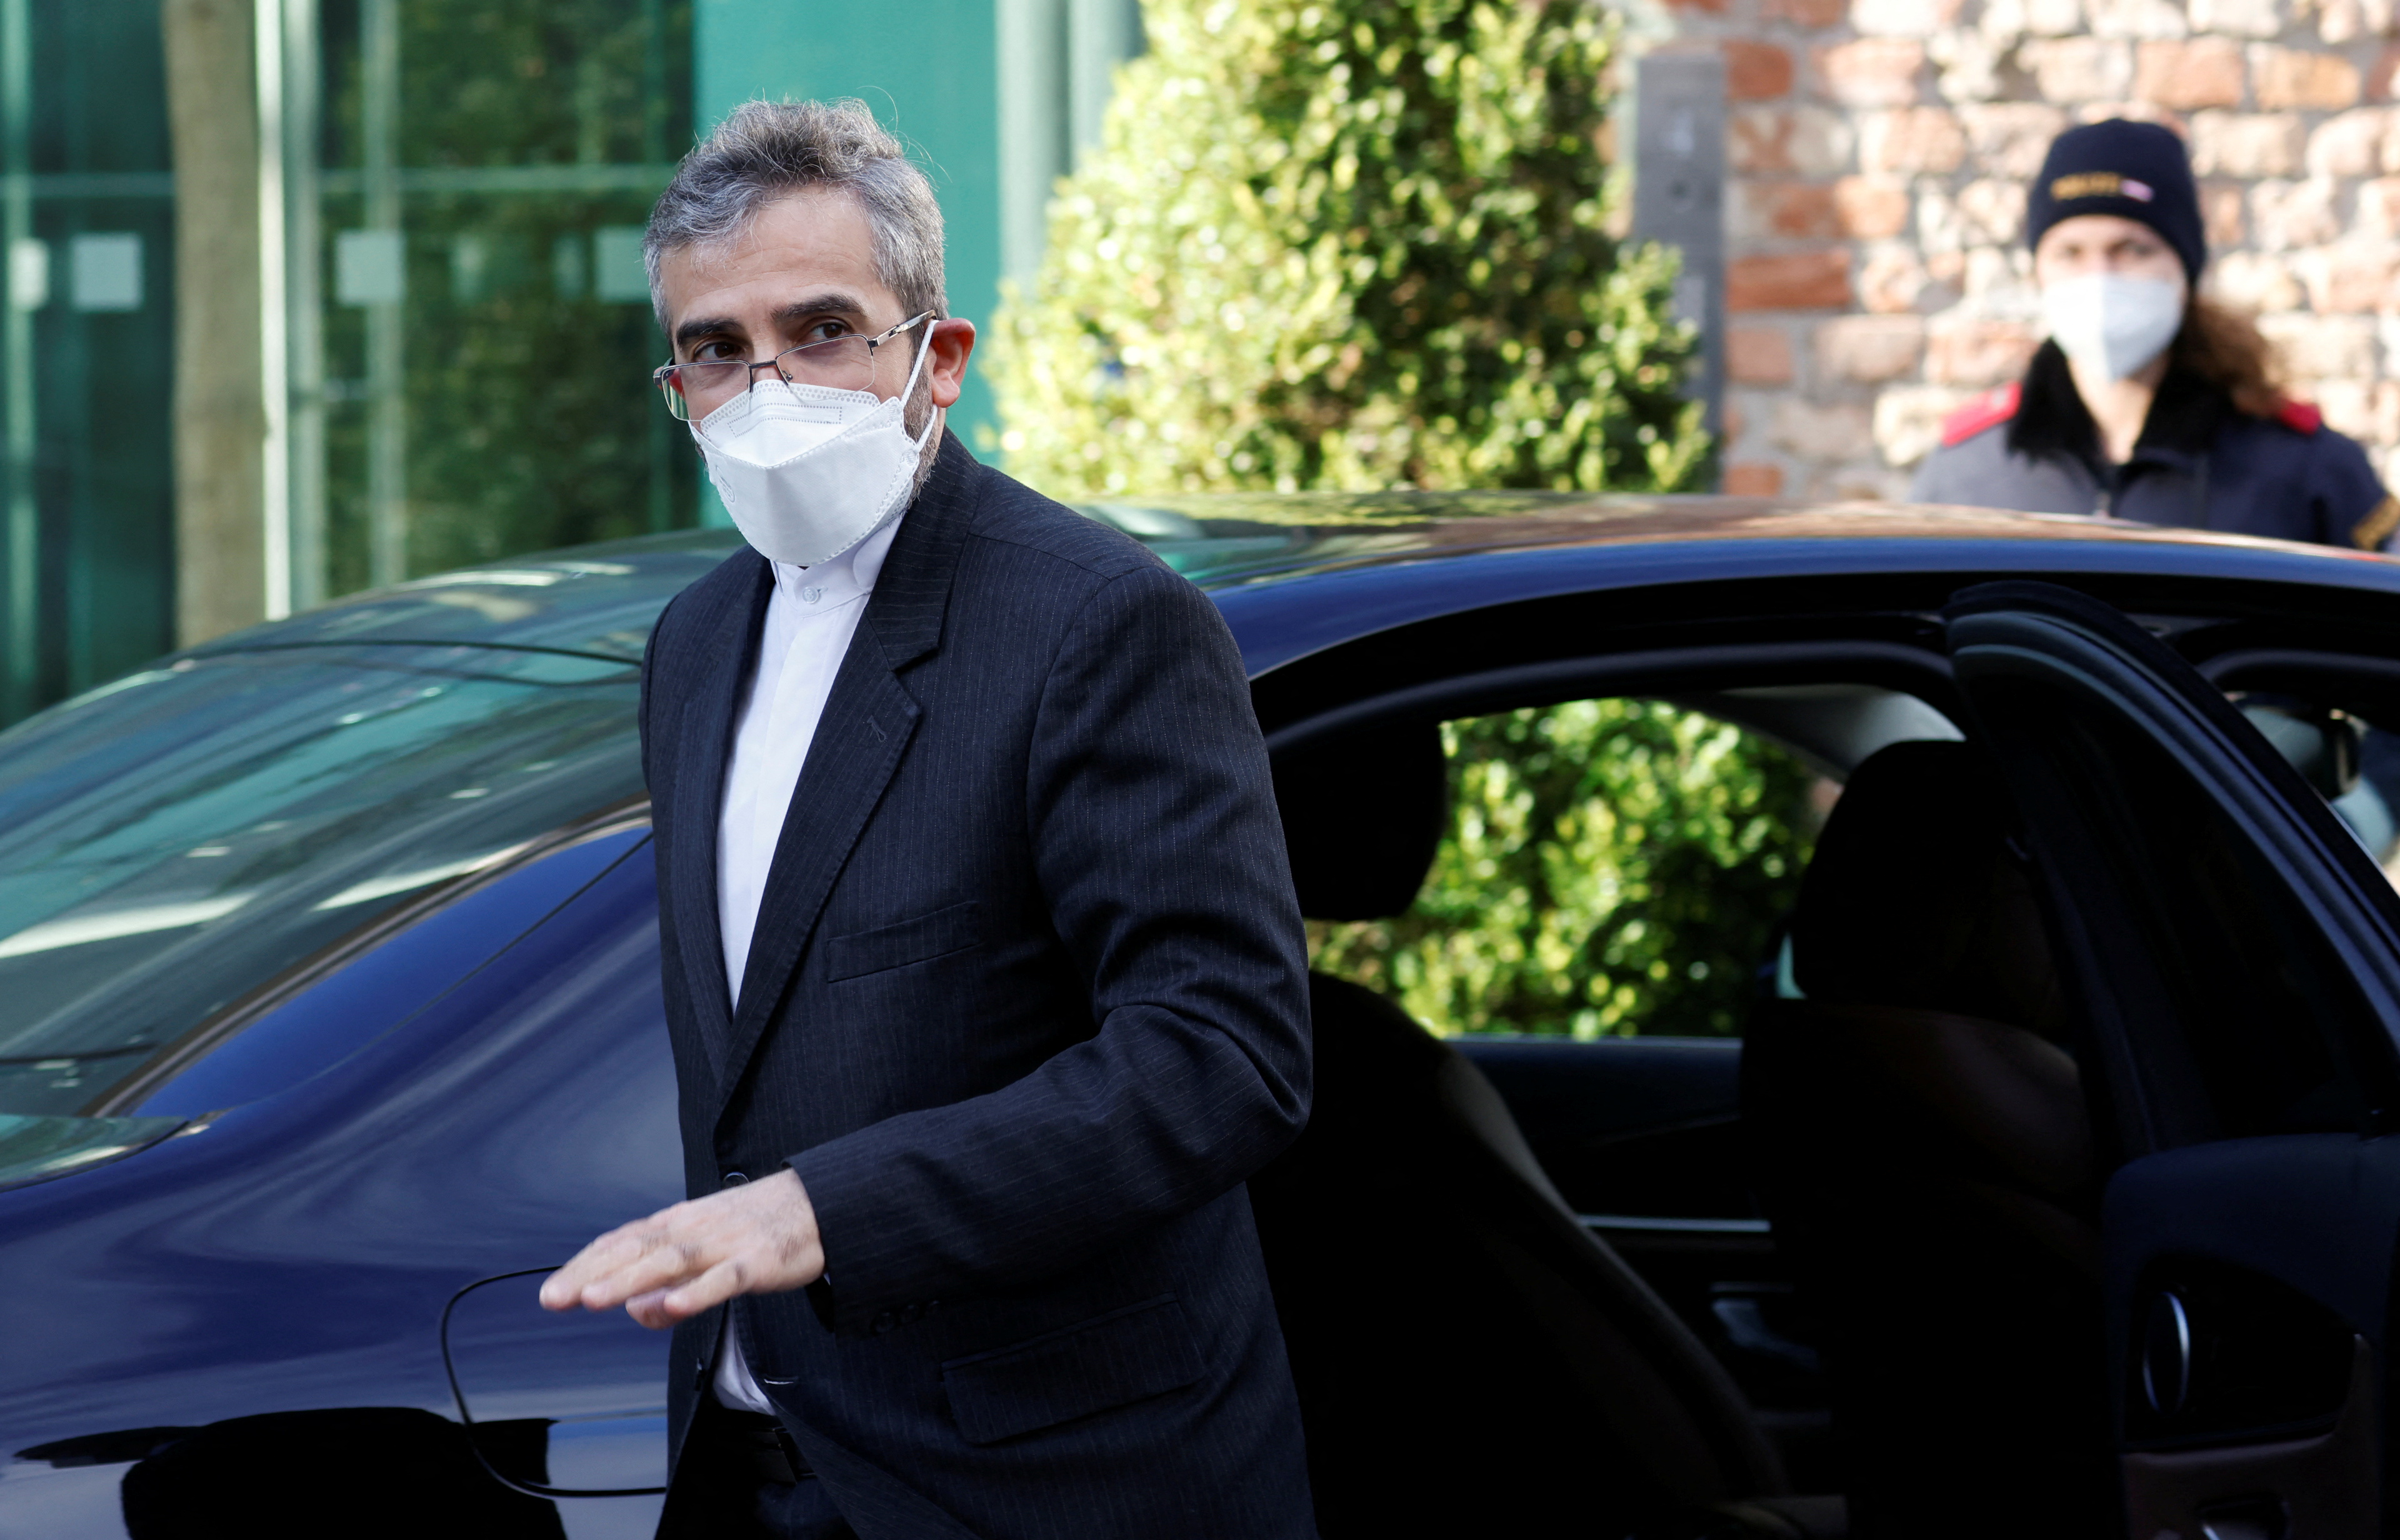 Iran's chief nuclear negotiator Ali Bagheri Kani arrives at Palais Coburg where closed-door nuclear talks with Iran take place in Vienna, Austria, February 8, 2022.  REUTERS/Leonhard Foeger